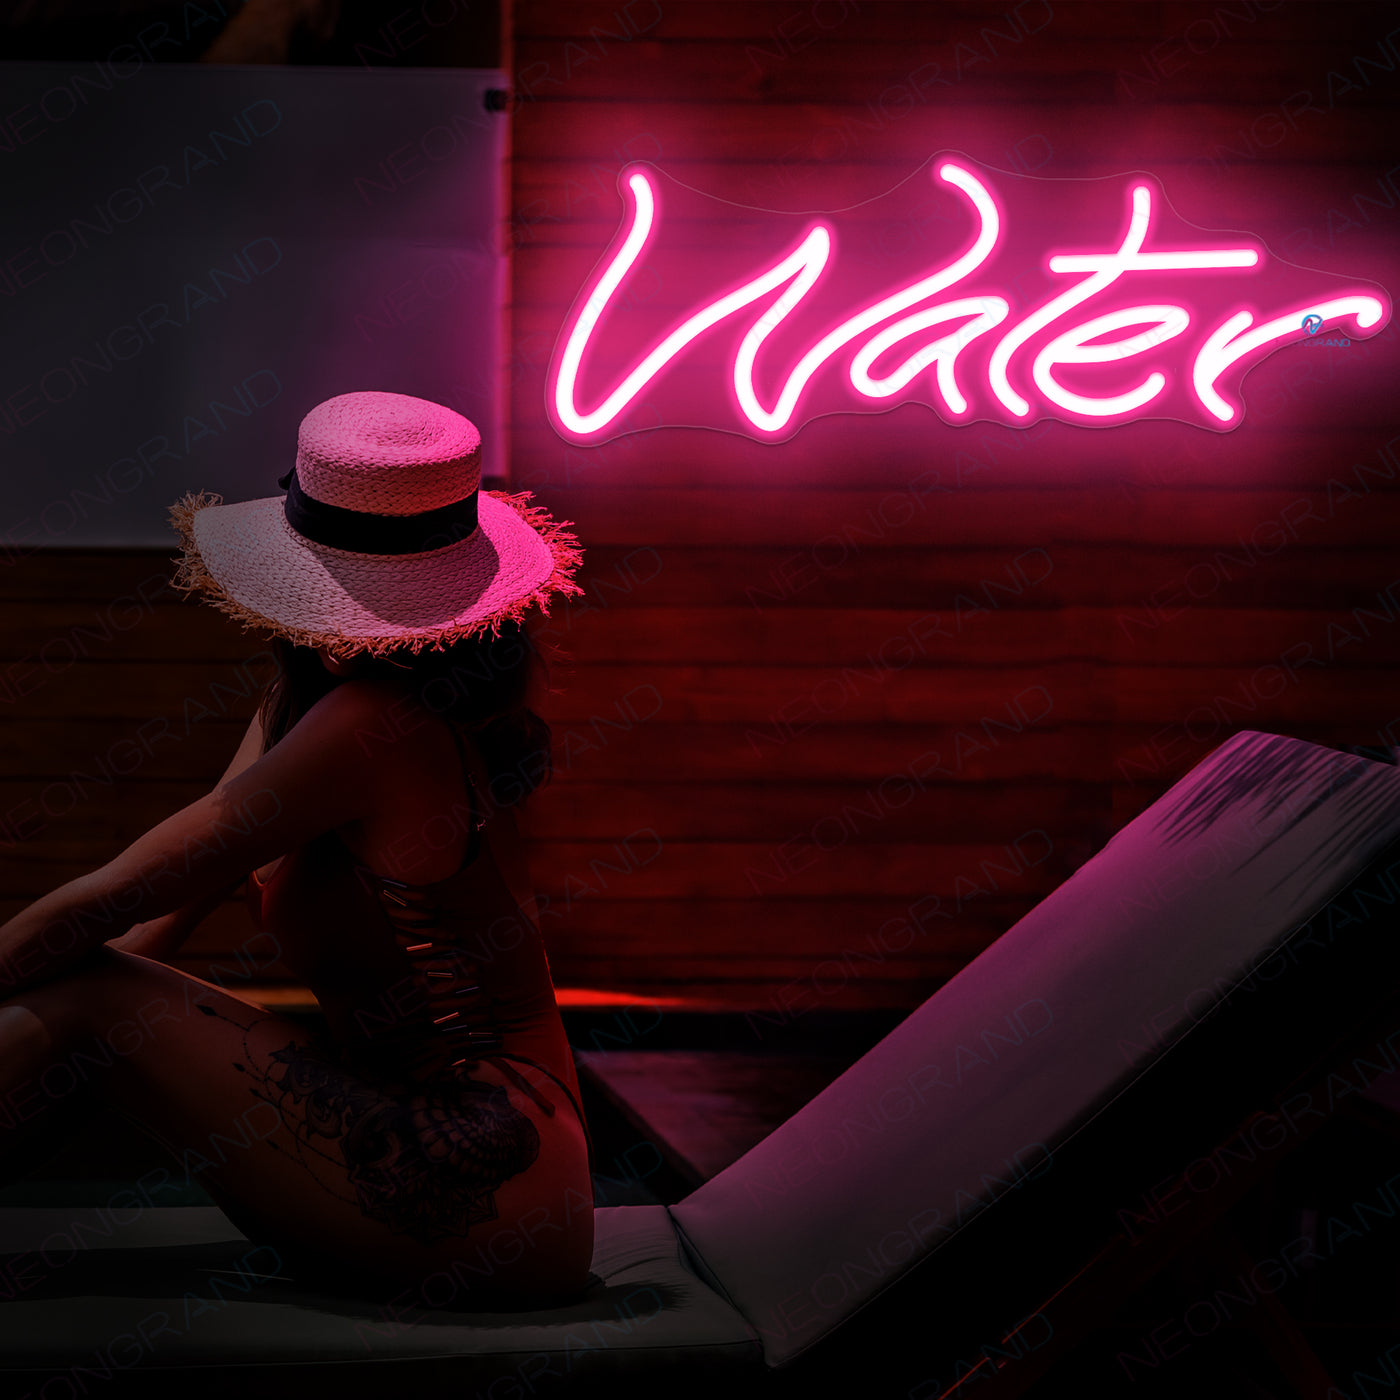 Water Neon Sign Led Light pink